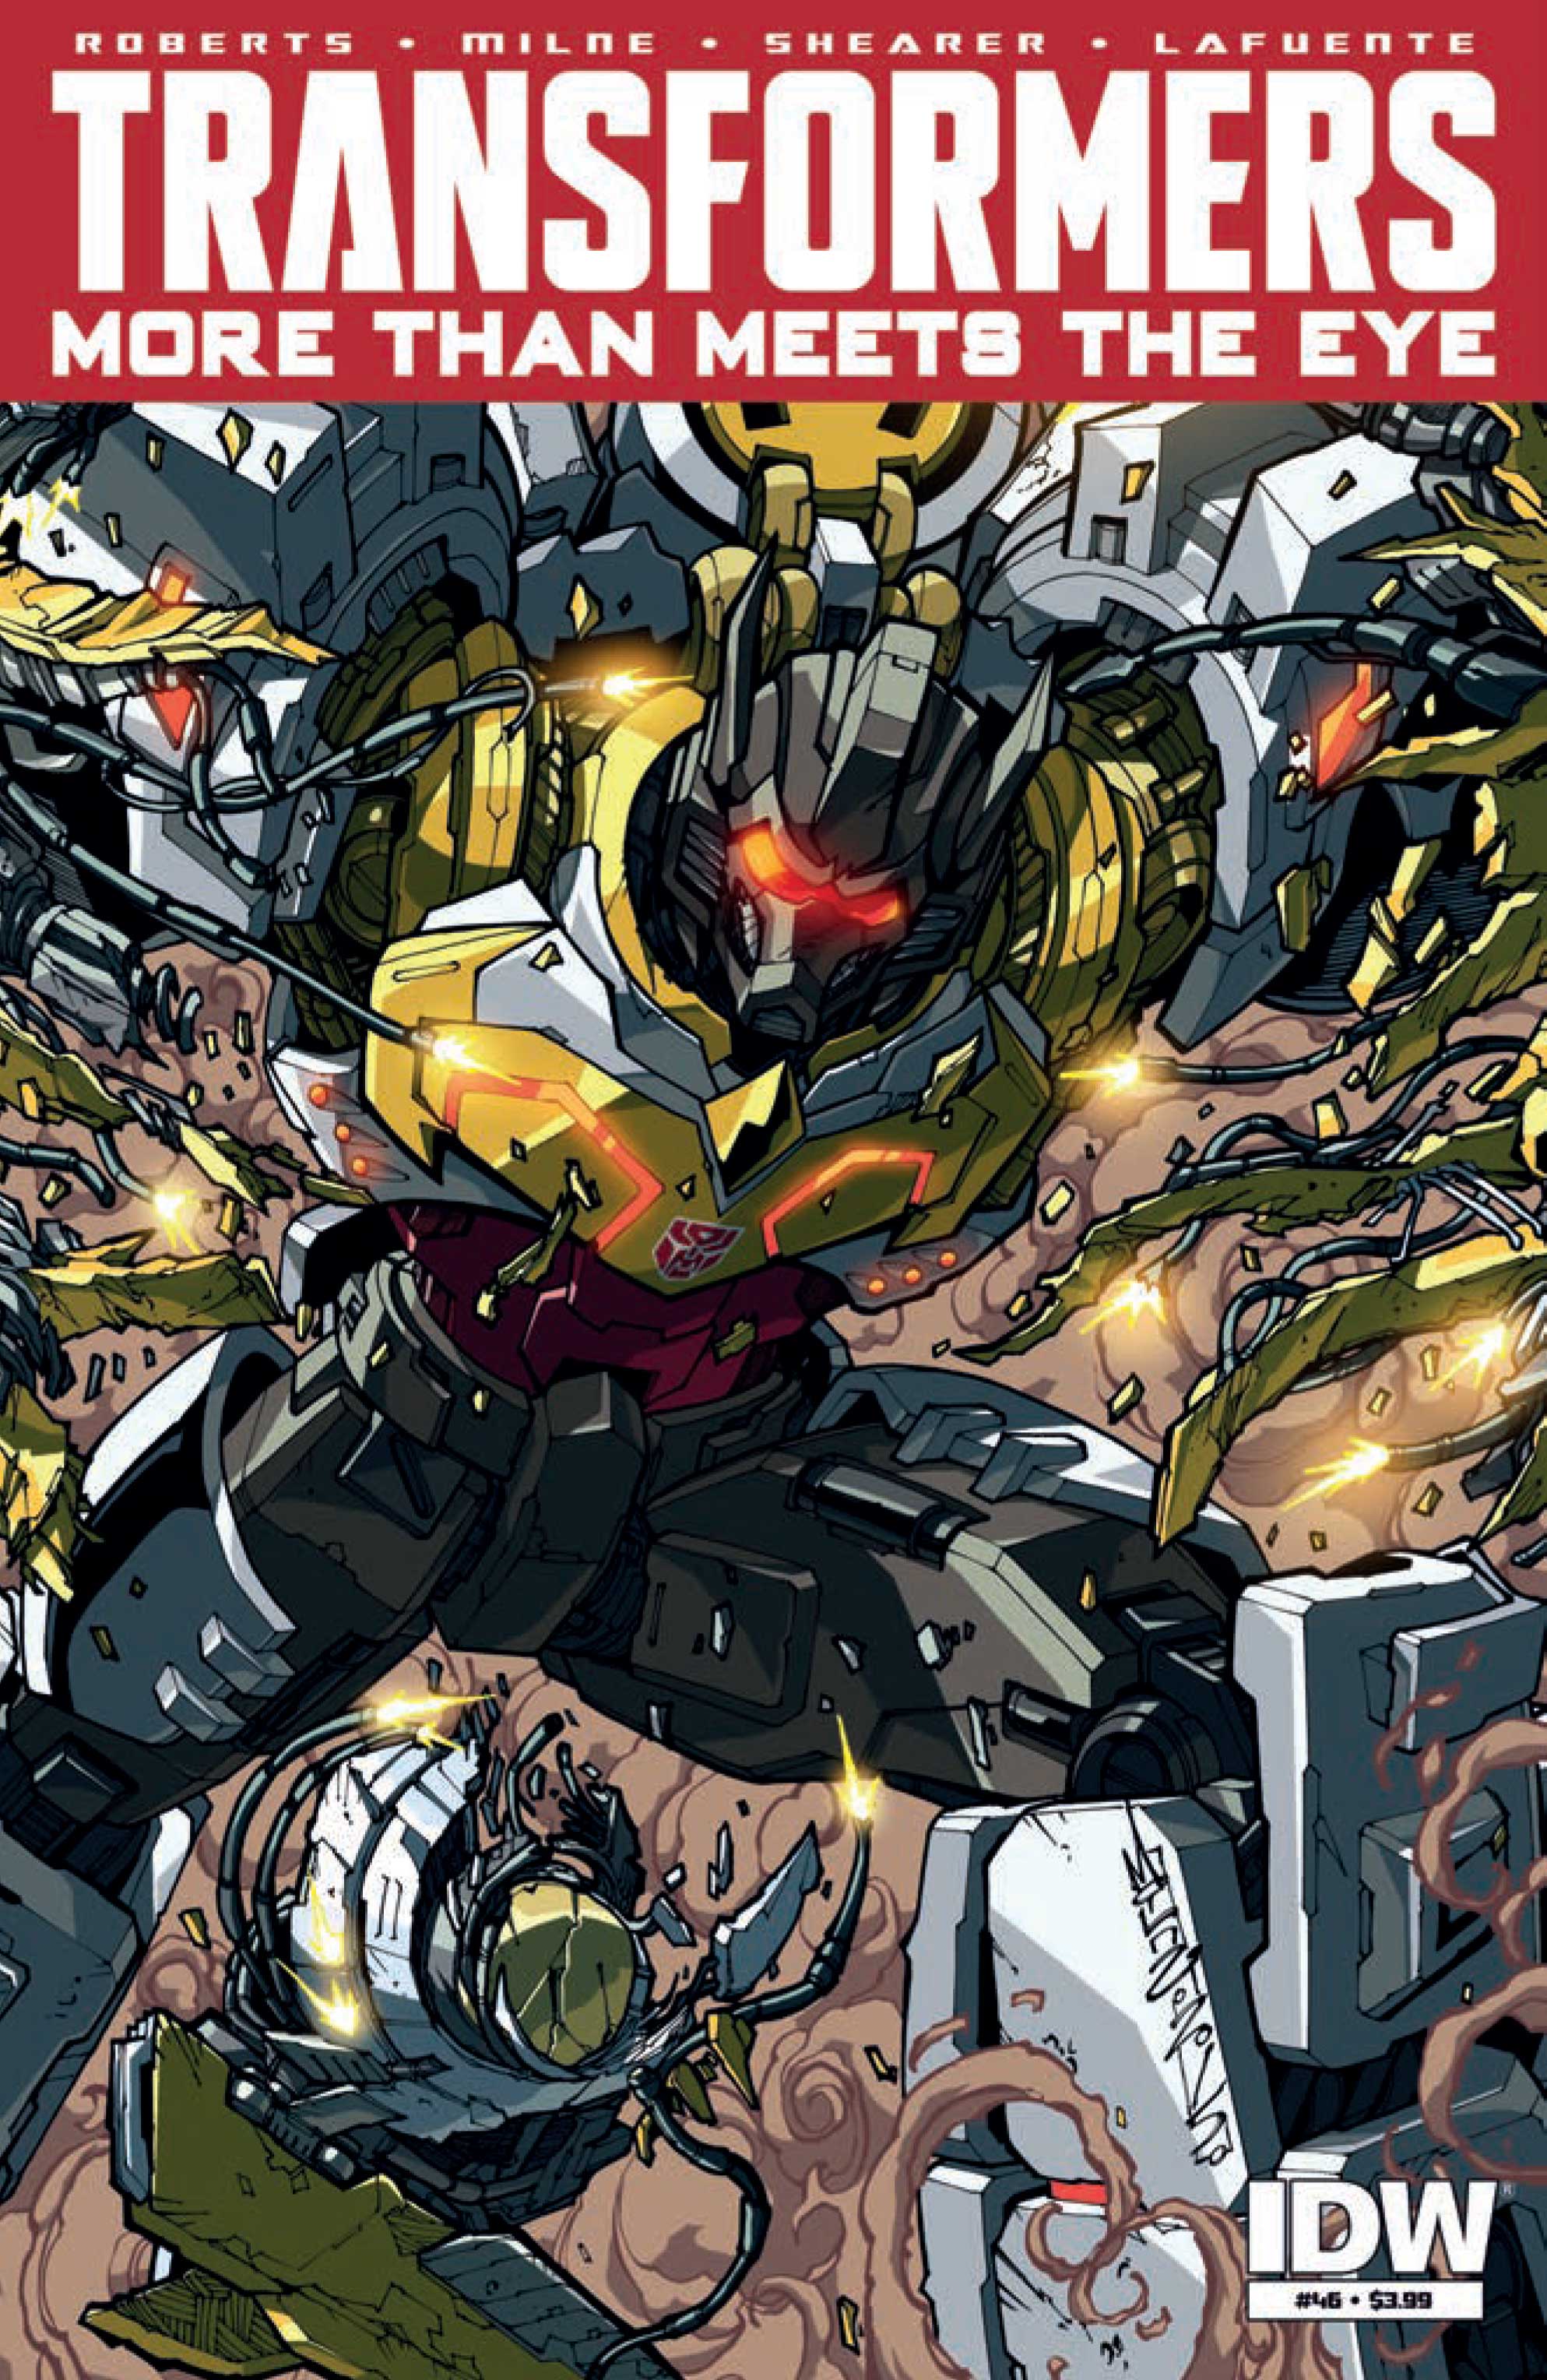 Transformers: More Than Meets the Eye #46 - MAJOR SPOILERS PREVIEW